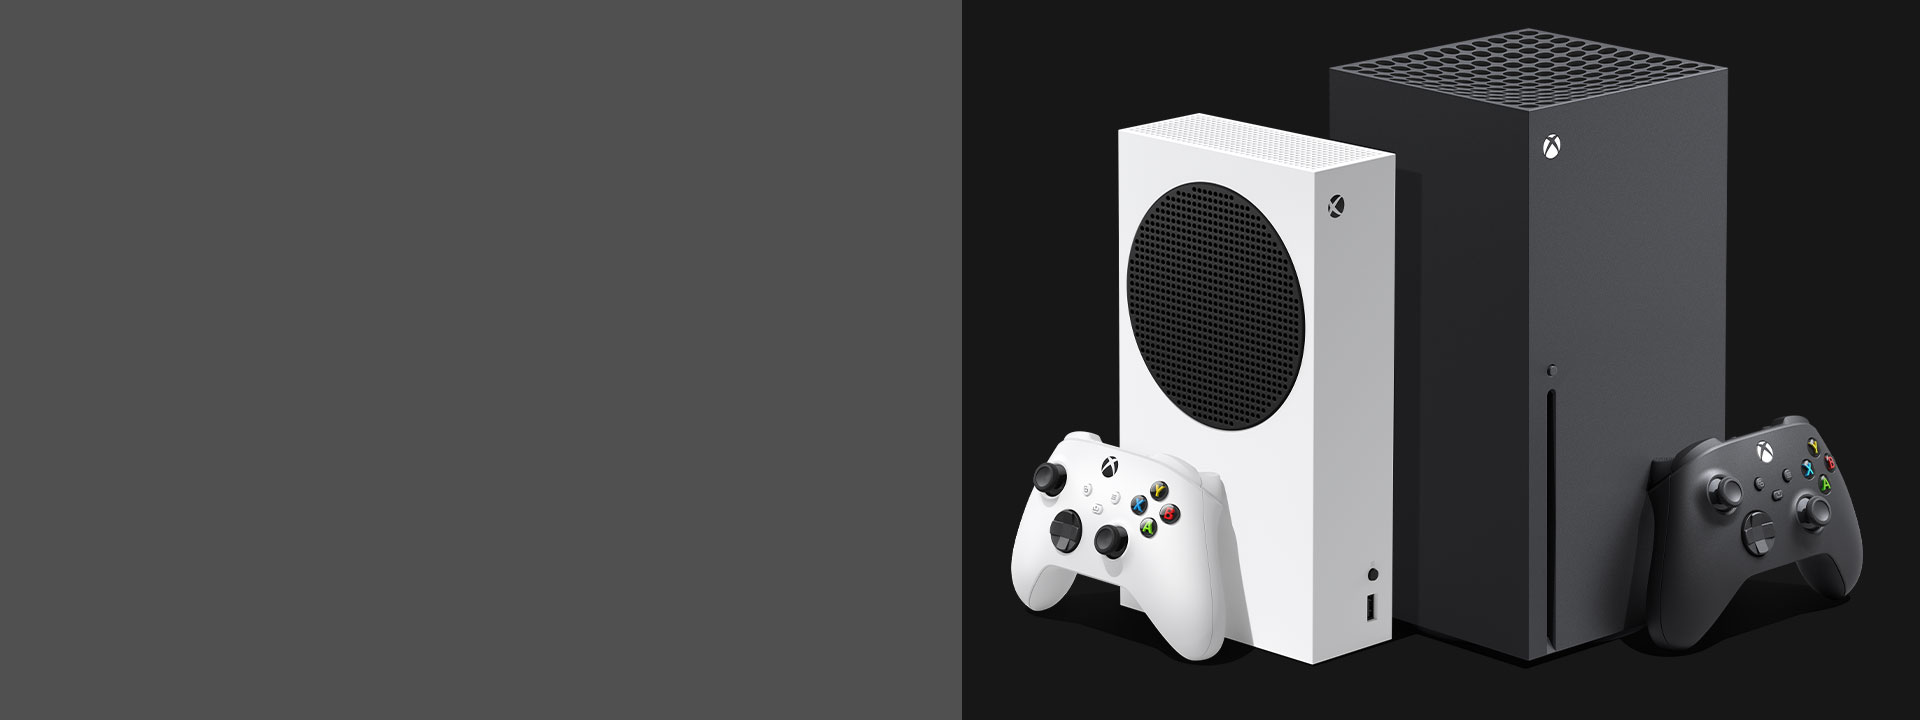 Xbox Series X and Xbox Series S consoles side by side.